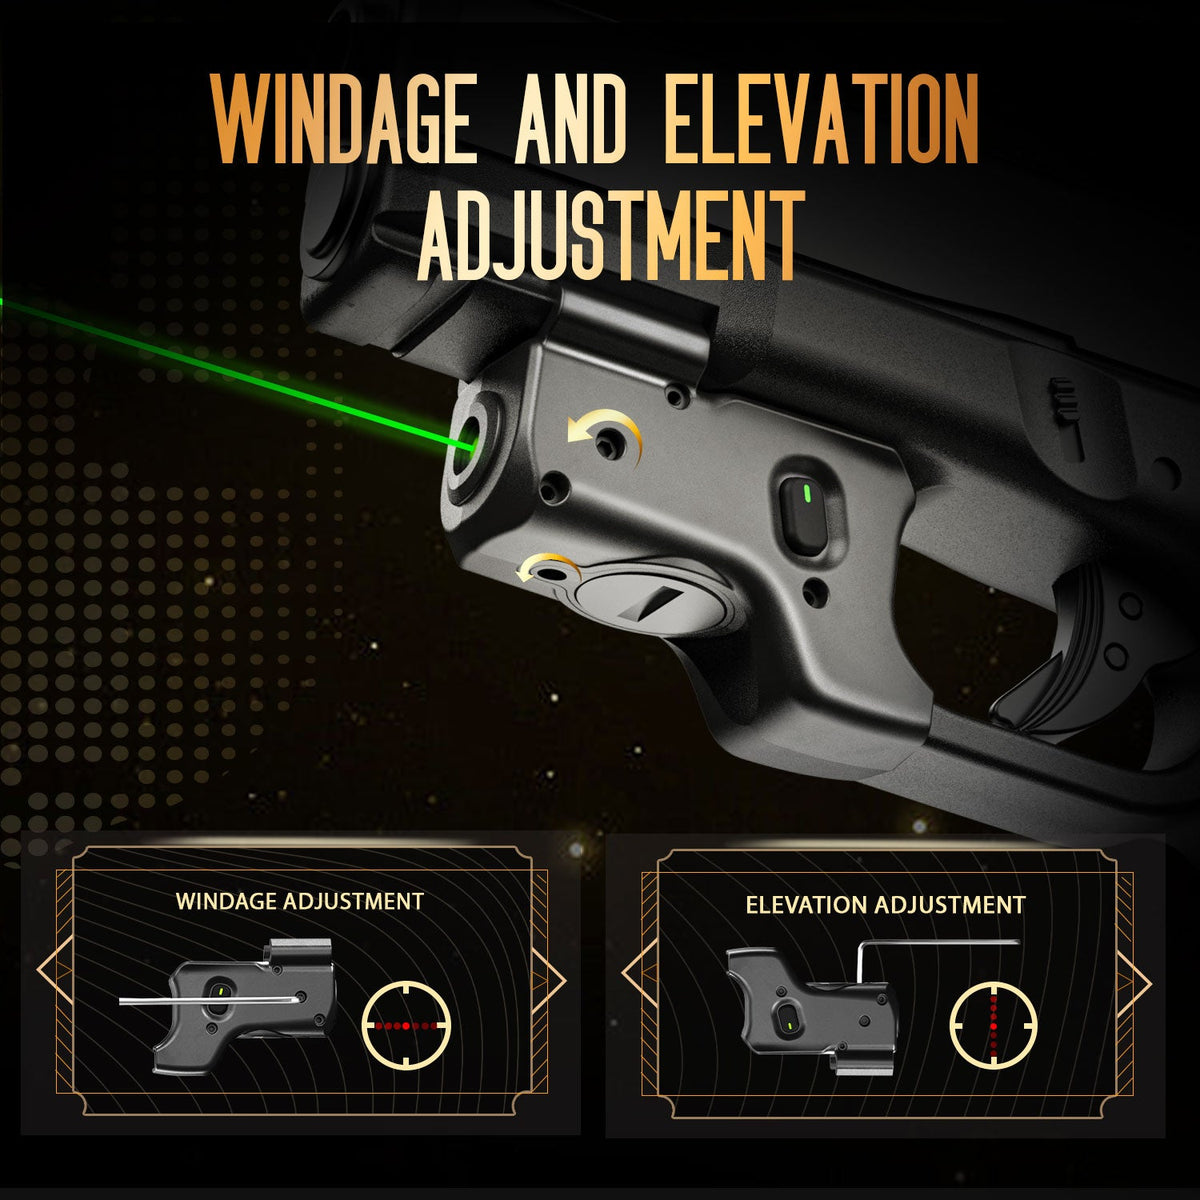 Green Laser Sight WLS-104G and Kydex Holster Combo Tailored Fit Glock 17/19/19X/23/31/32/44/45, Ultra Compact G19 Beam Sight, Gun Sight with Ambidextrous On/Off Switch & Power Indicator|WARRIORLAND